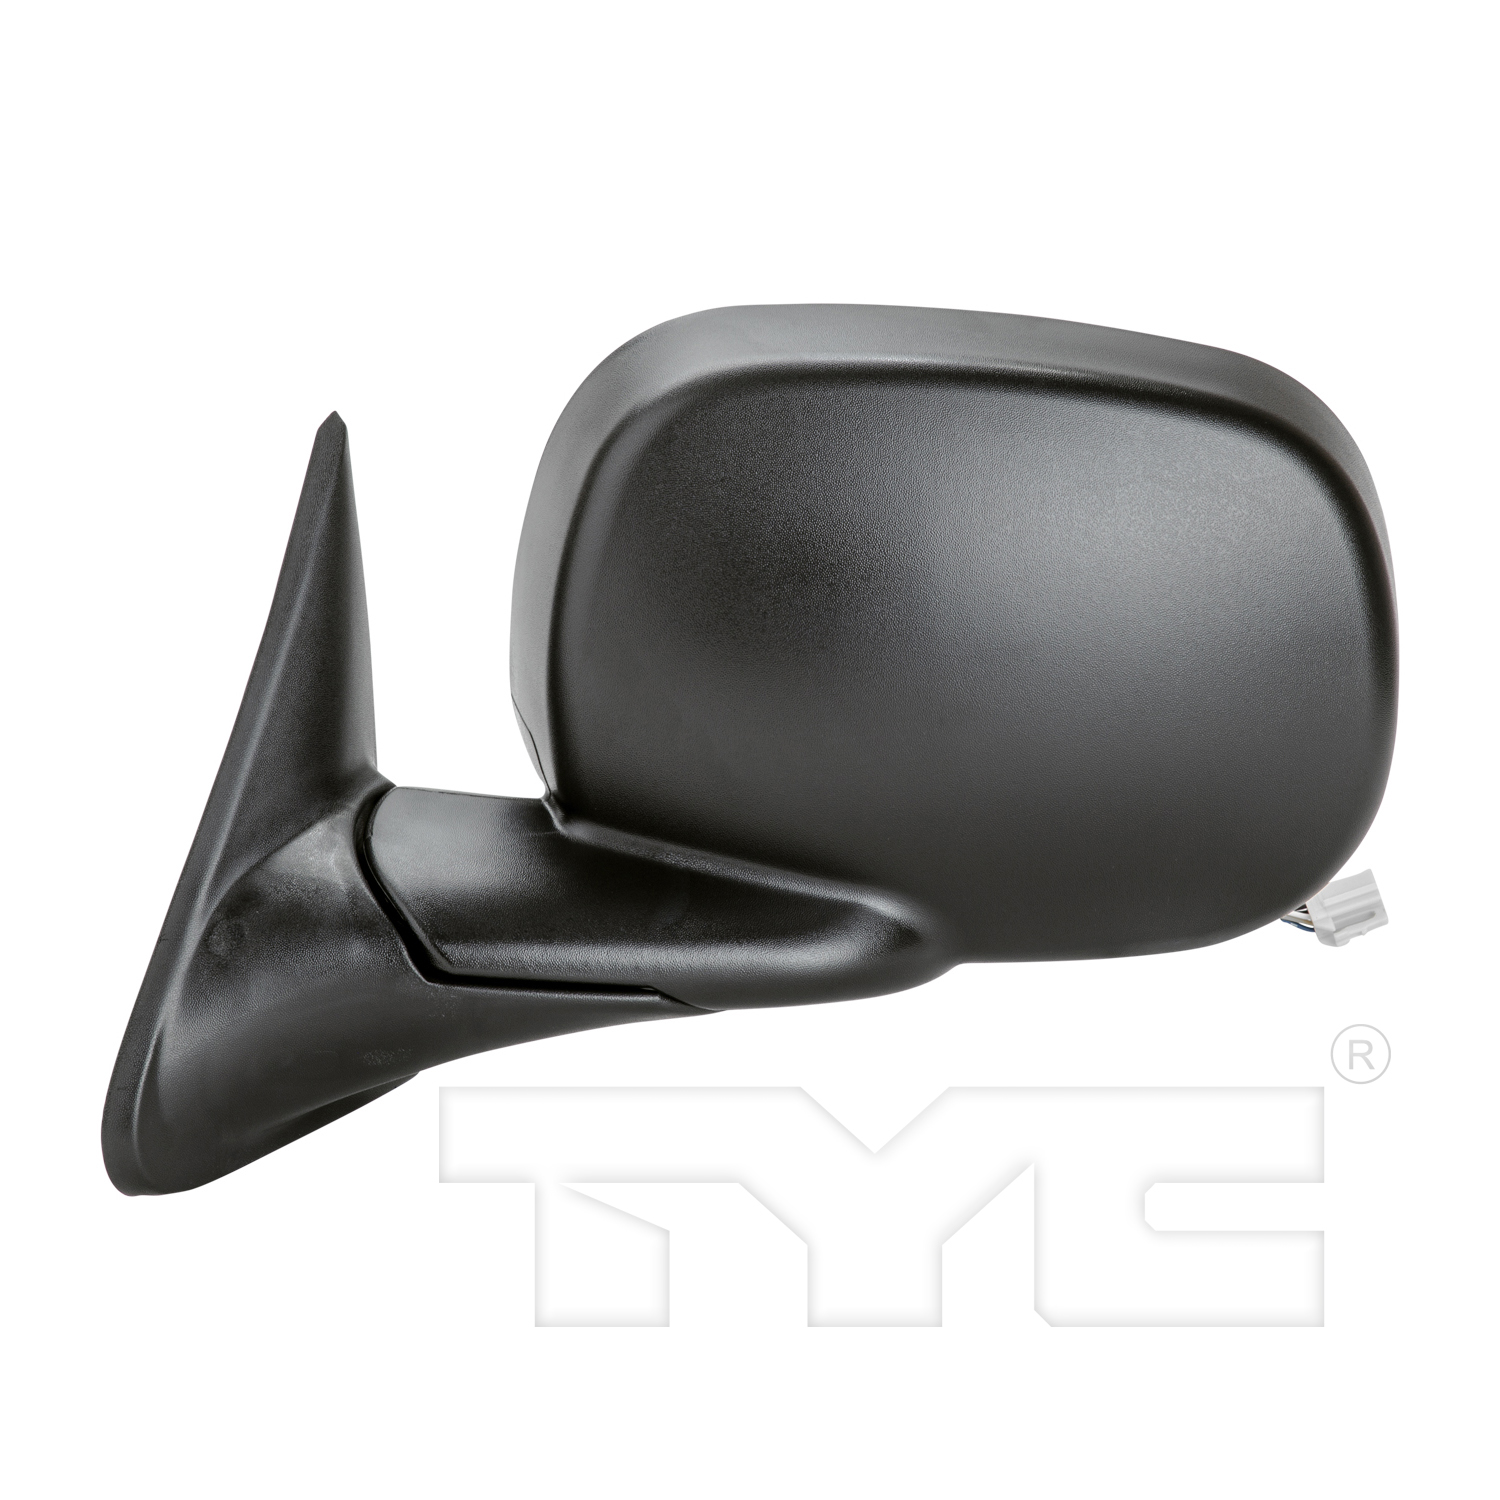 Aftermarket MIRRORS for DODGE - RAM 3500, RAM 3500,98-01,LT Mirror outside rear view